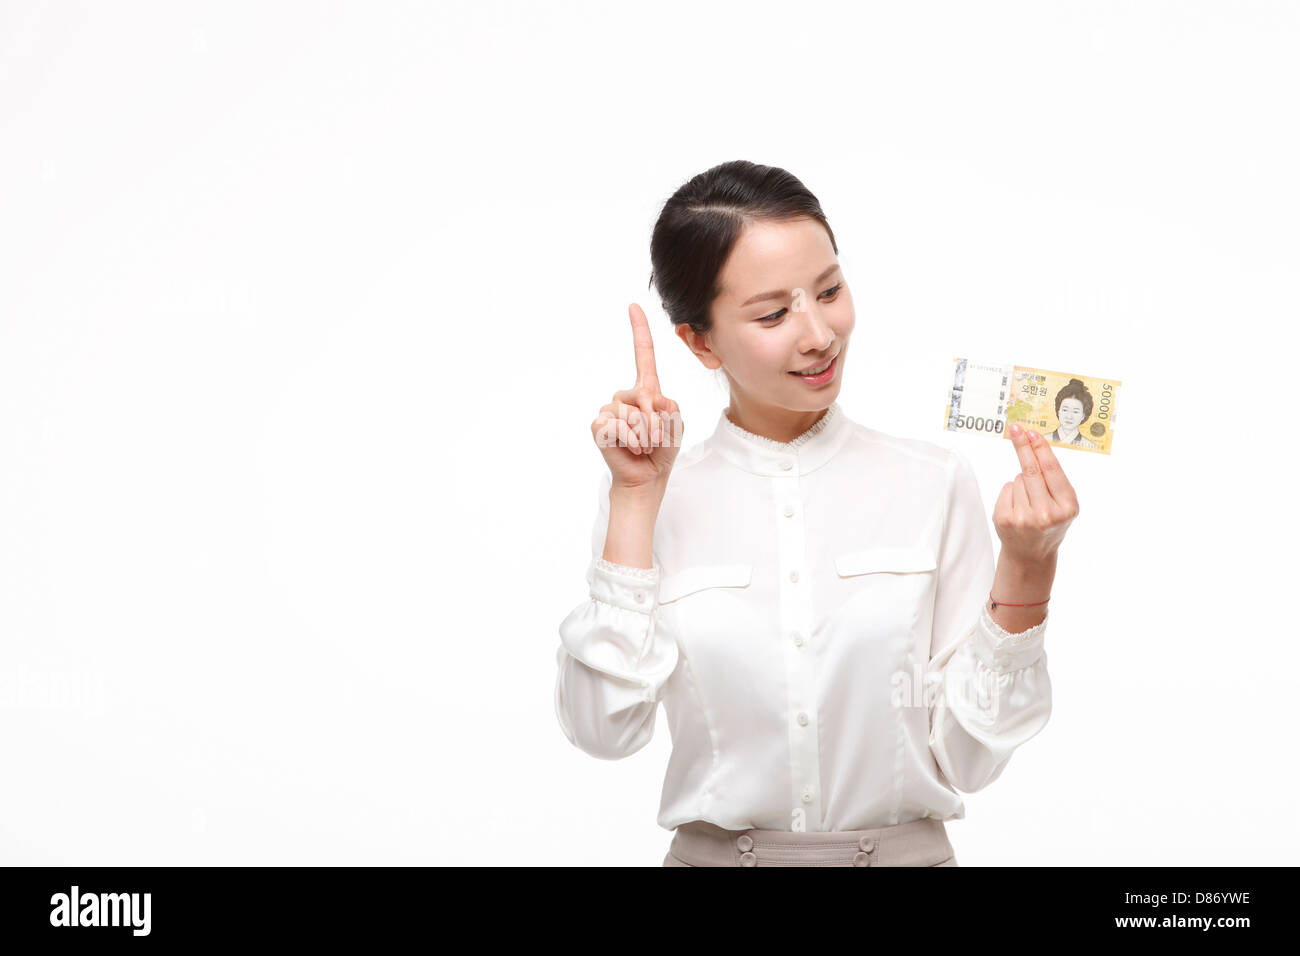 young woman posing paper money. Stock Photo